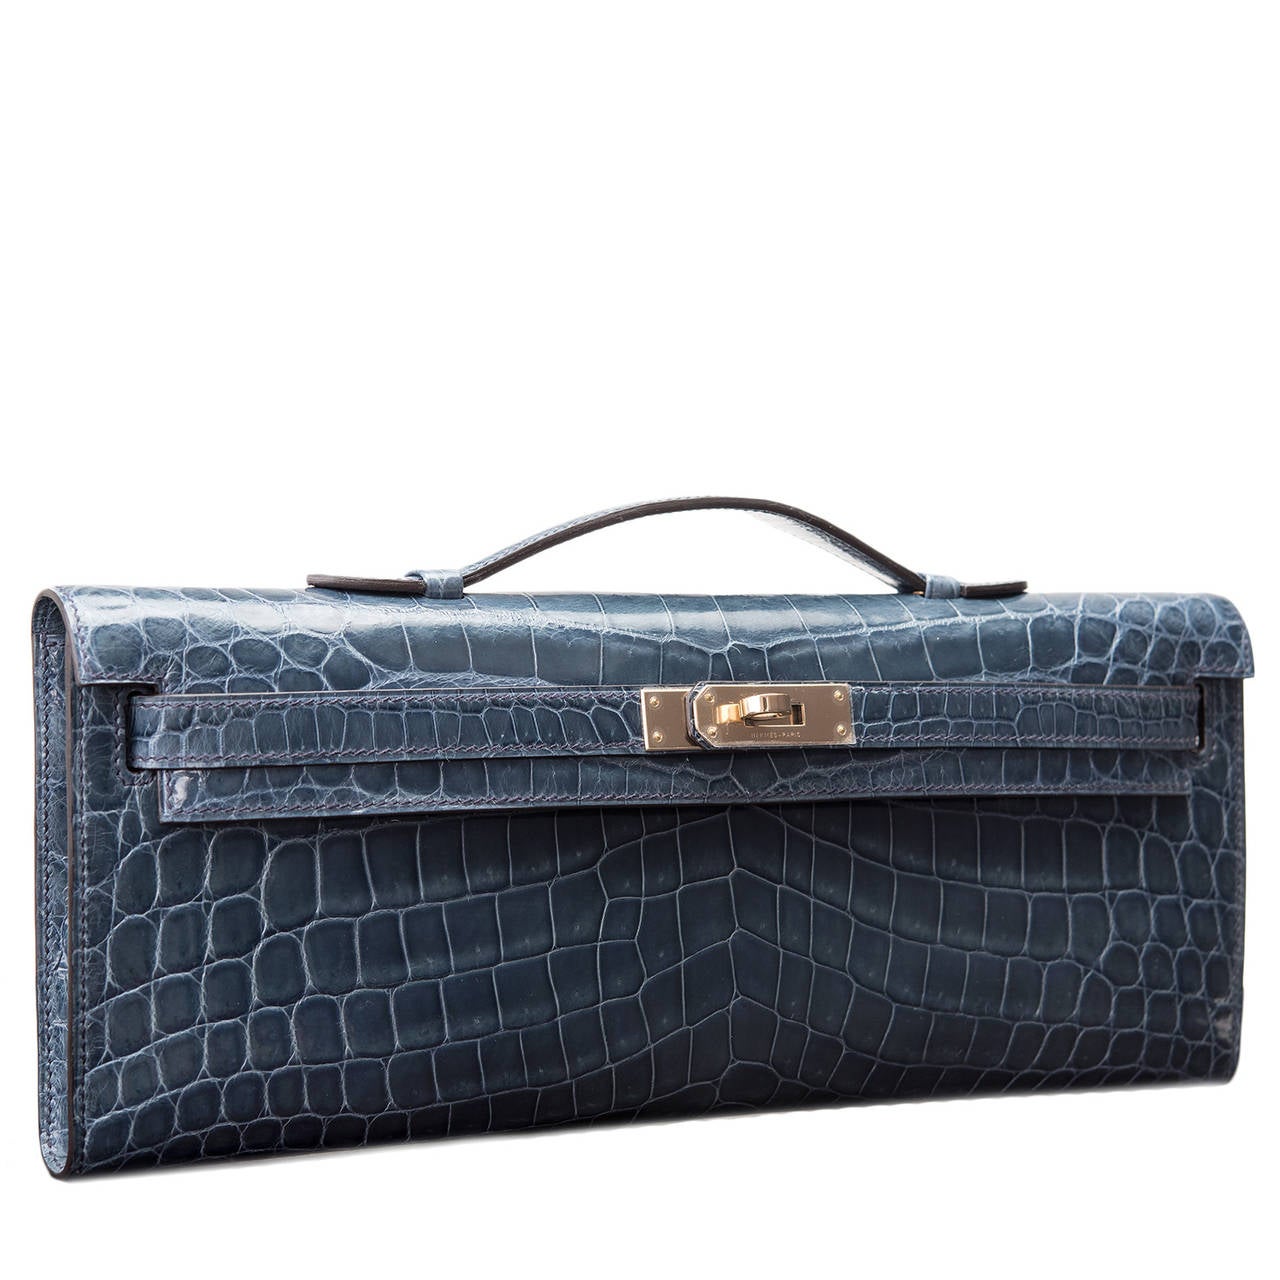 Hermes Bleu Izmir shiny niloticus crocodile Kelly Cut with permabrass hardware.

This Kelly Cut in a Hermes' favorite color -- Blue Tempete -- is a gorgeous blue that is elegant with rare Nilo crocodile skin and permabrass hardware; the bag has